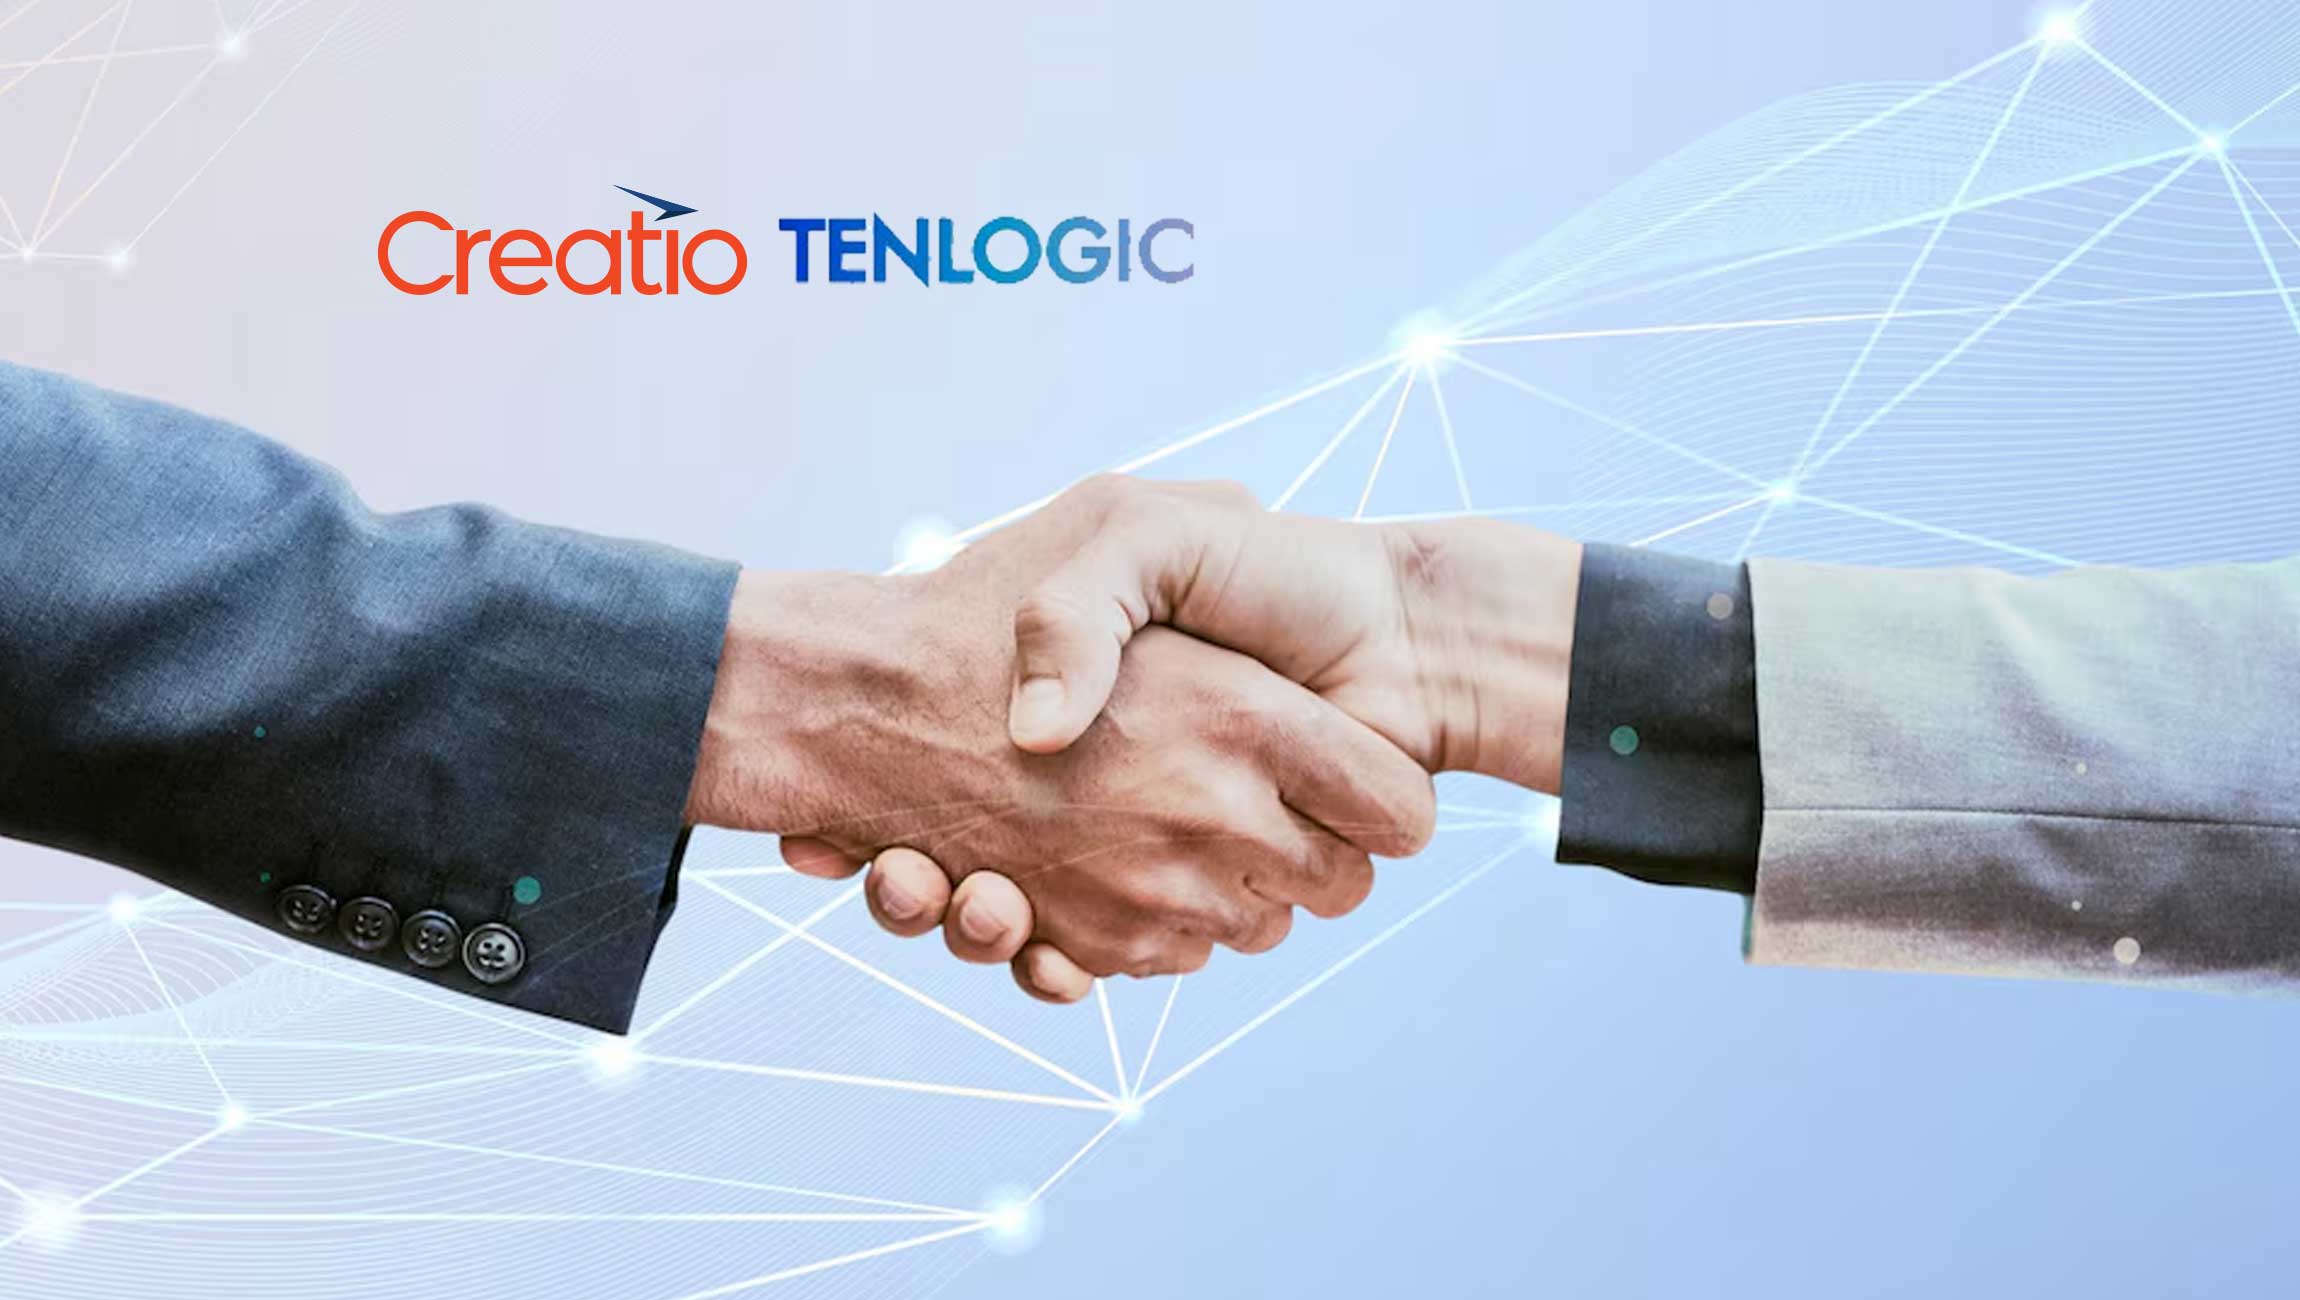 Creatio Partners with TENLOGIC to Empower More Organizations Through No-Code for Workflow Automation and CRM